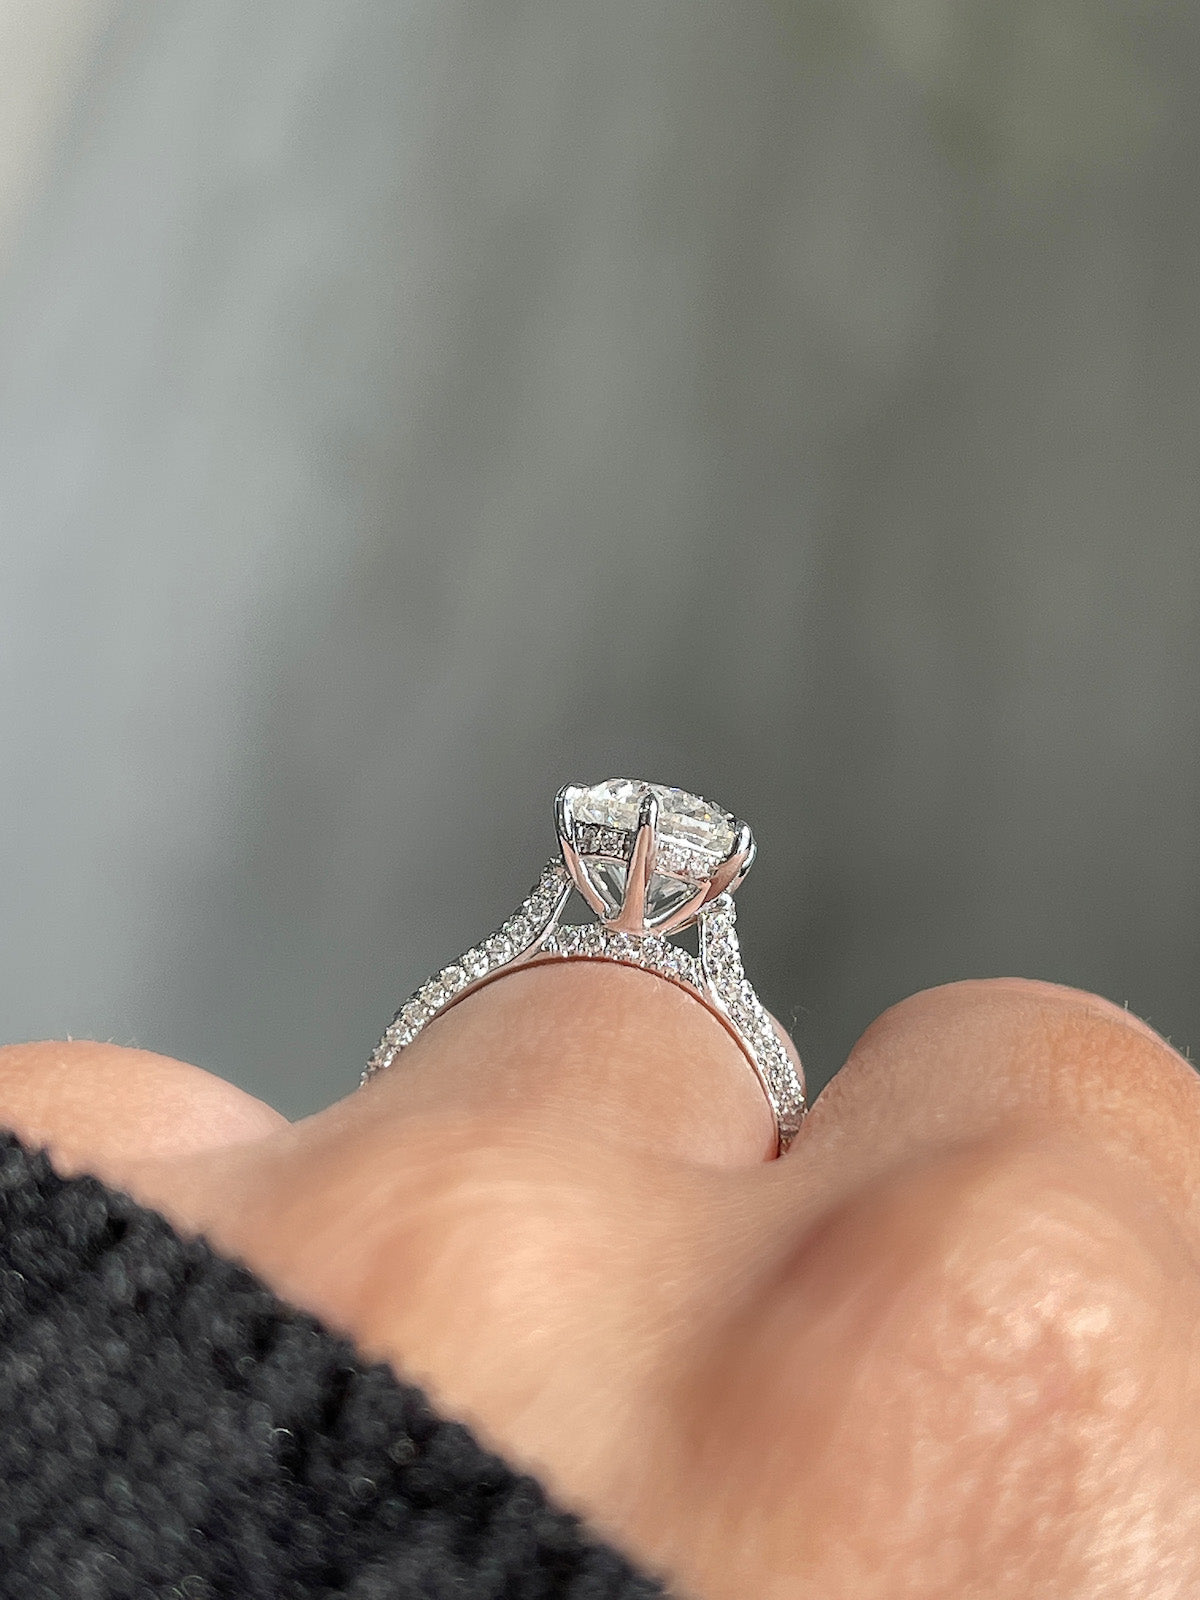 Load image into Gallery viewer, Engagement Ring Wednesday | 2.01 Round Brilliant Diamond - Happy Jewelers Fine Jewelry Lifetime Warranty
